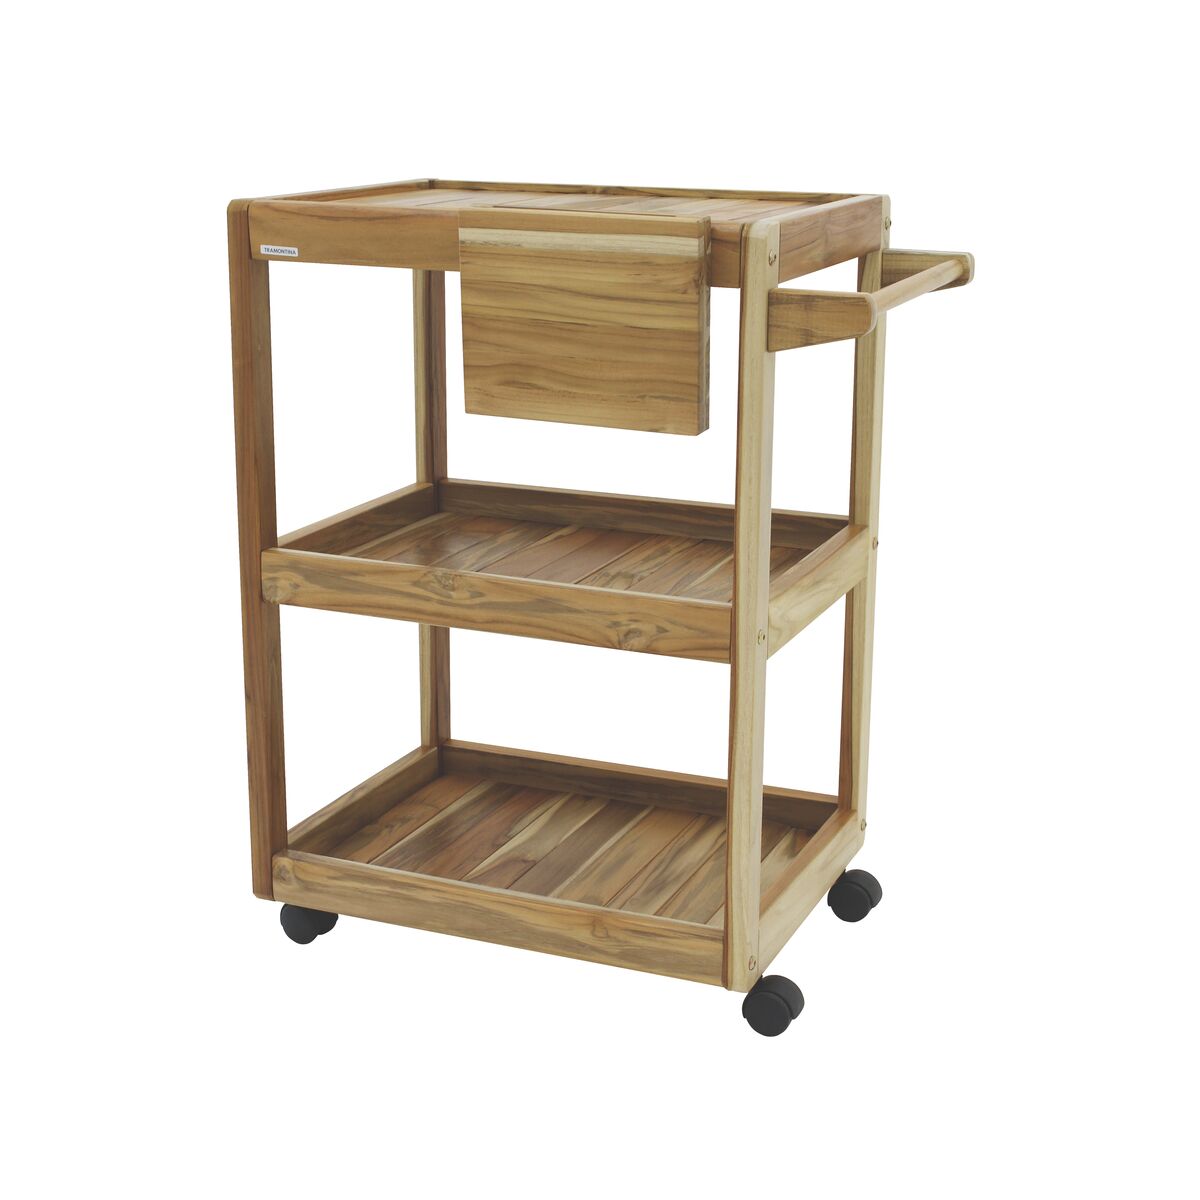 Tramontina Barbecue Serving Cart in Teak Wood with Varnished Finish and Knife Holder.